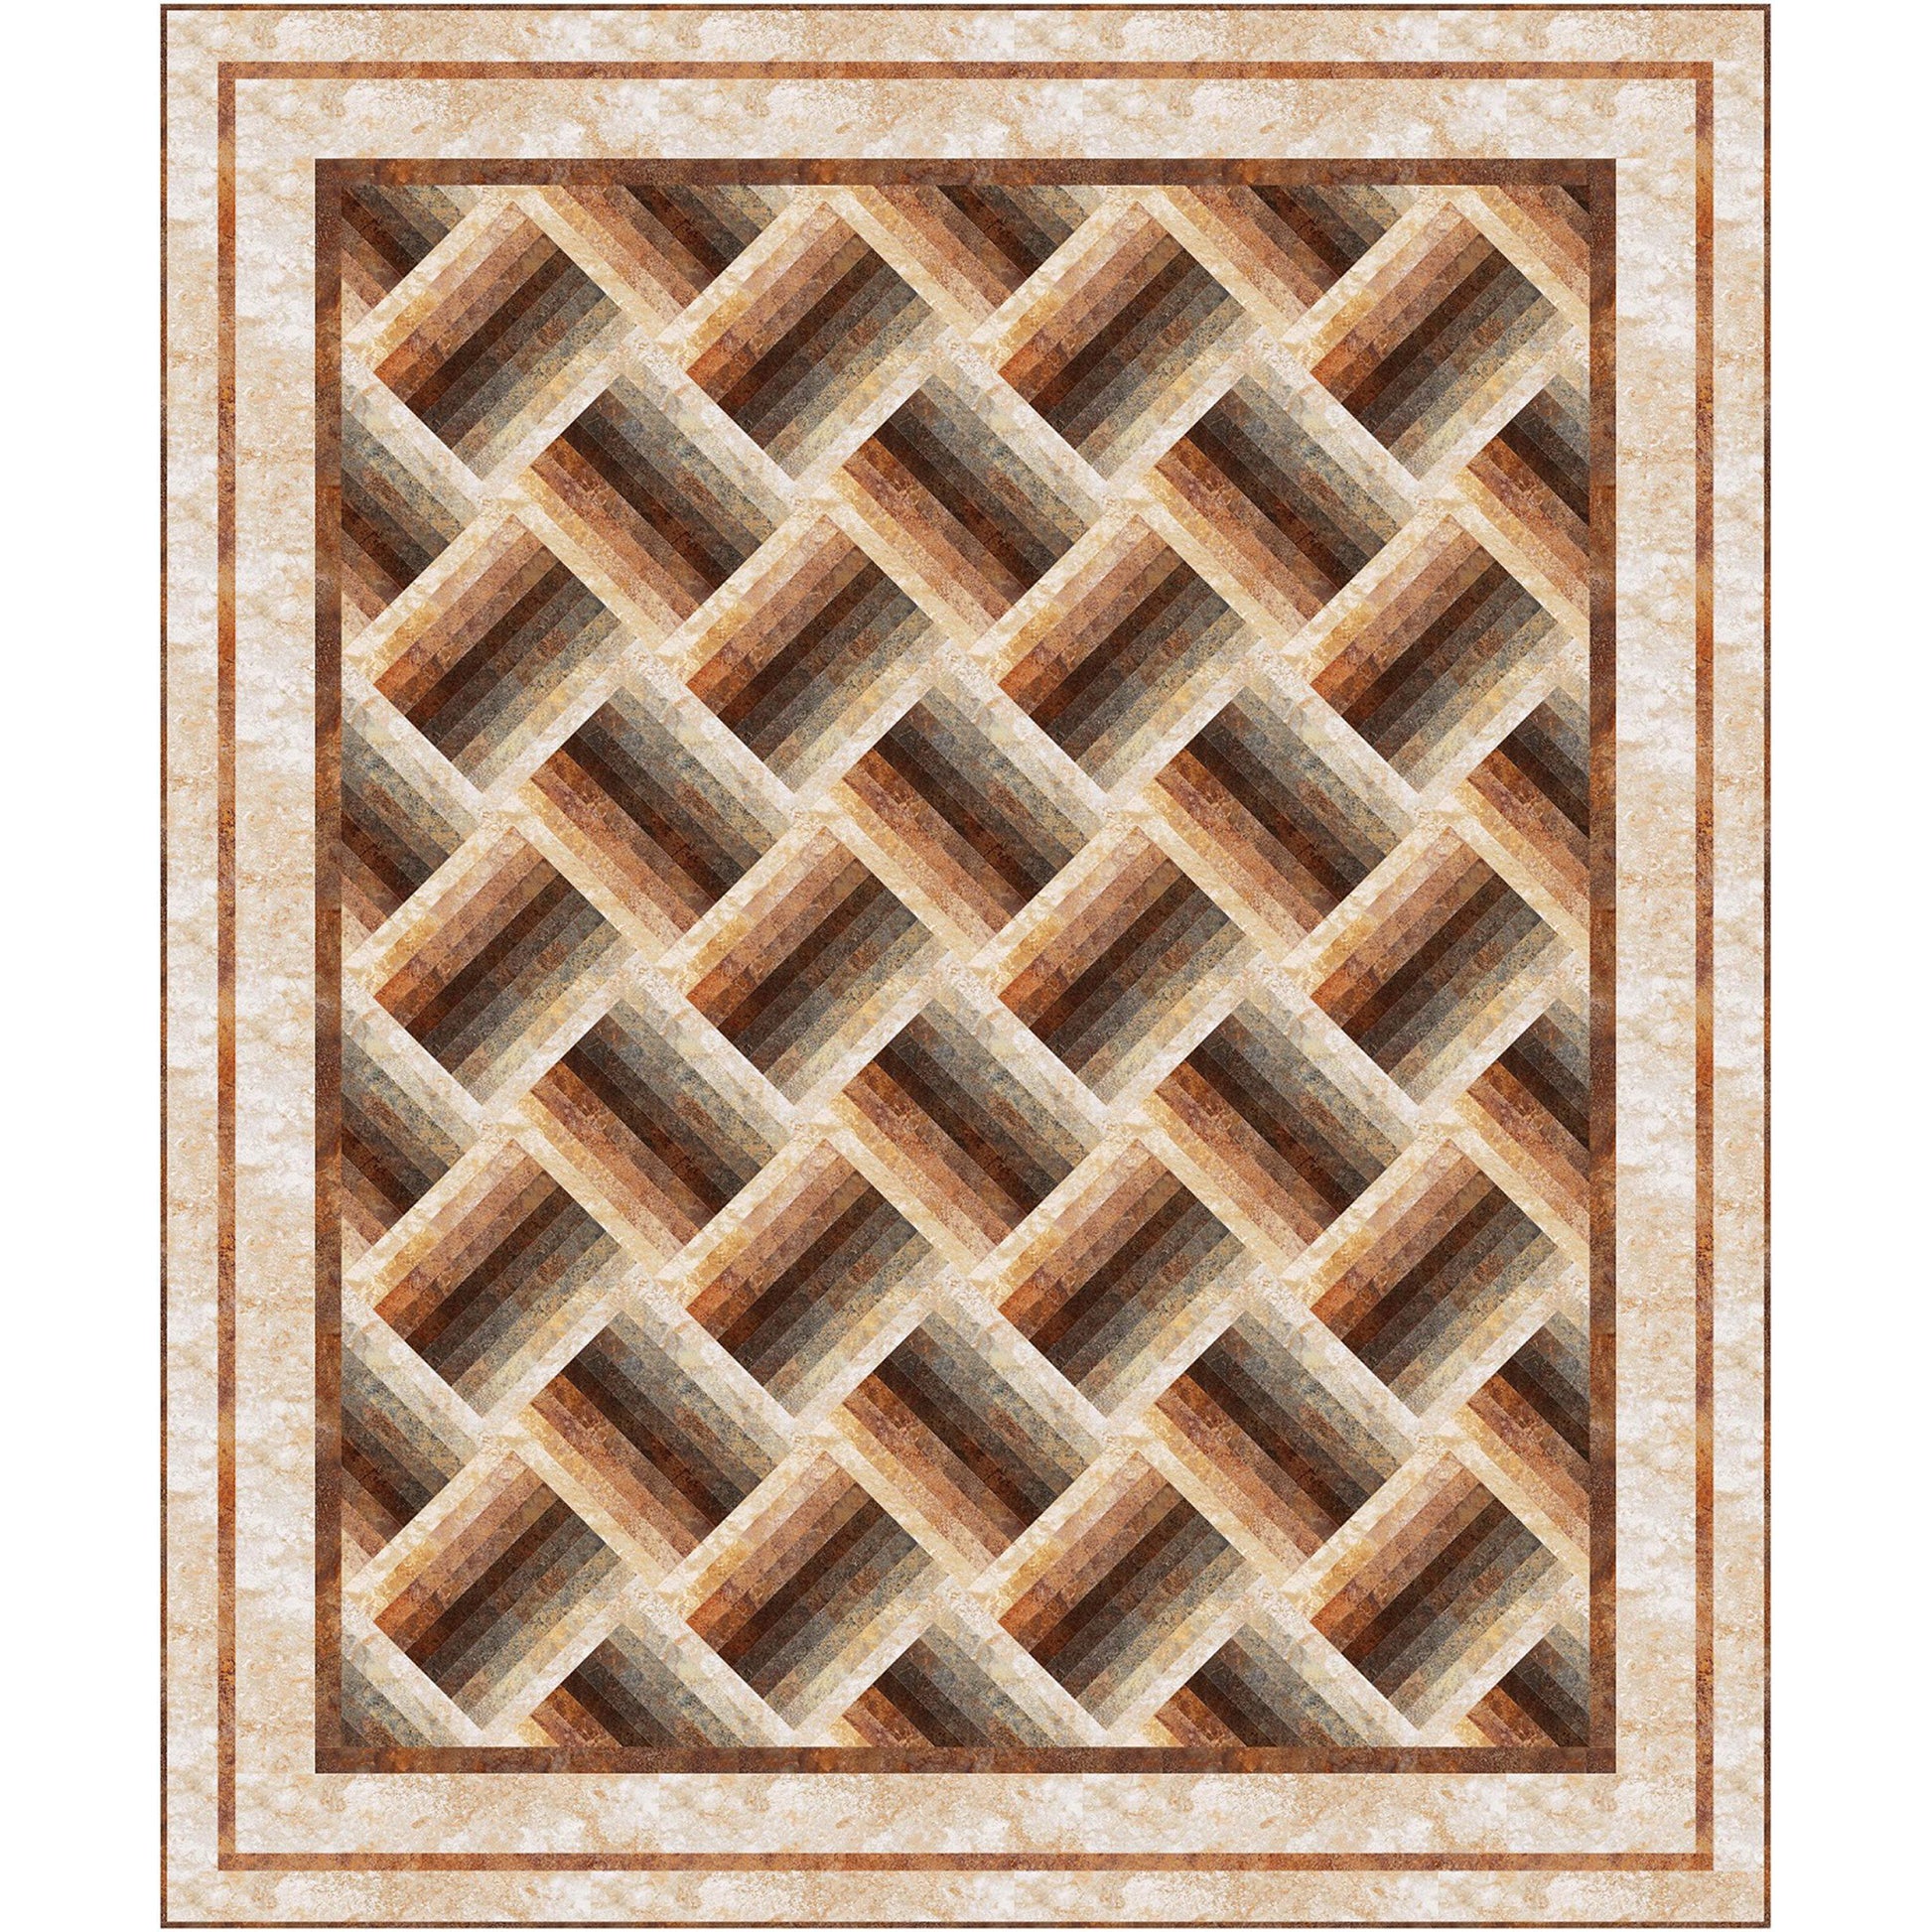 Elegant browns geometric pattern quilt looks a lot like a basket weave at an angle.